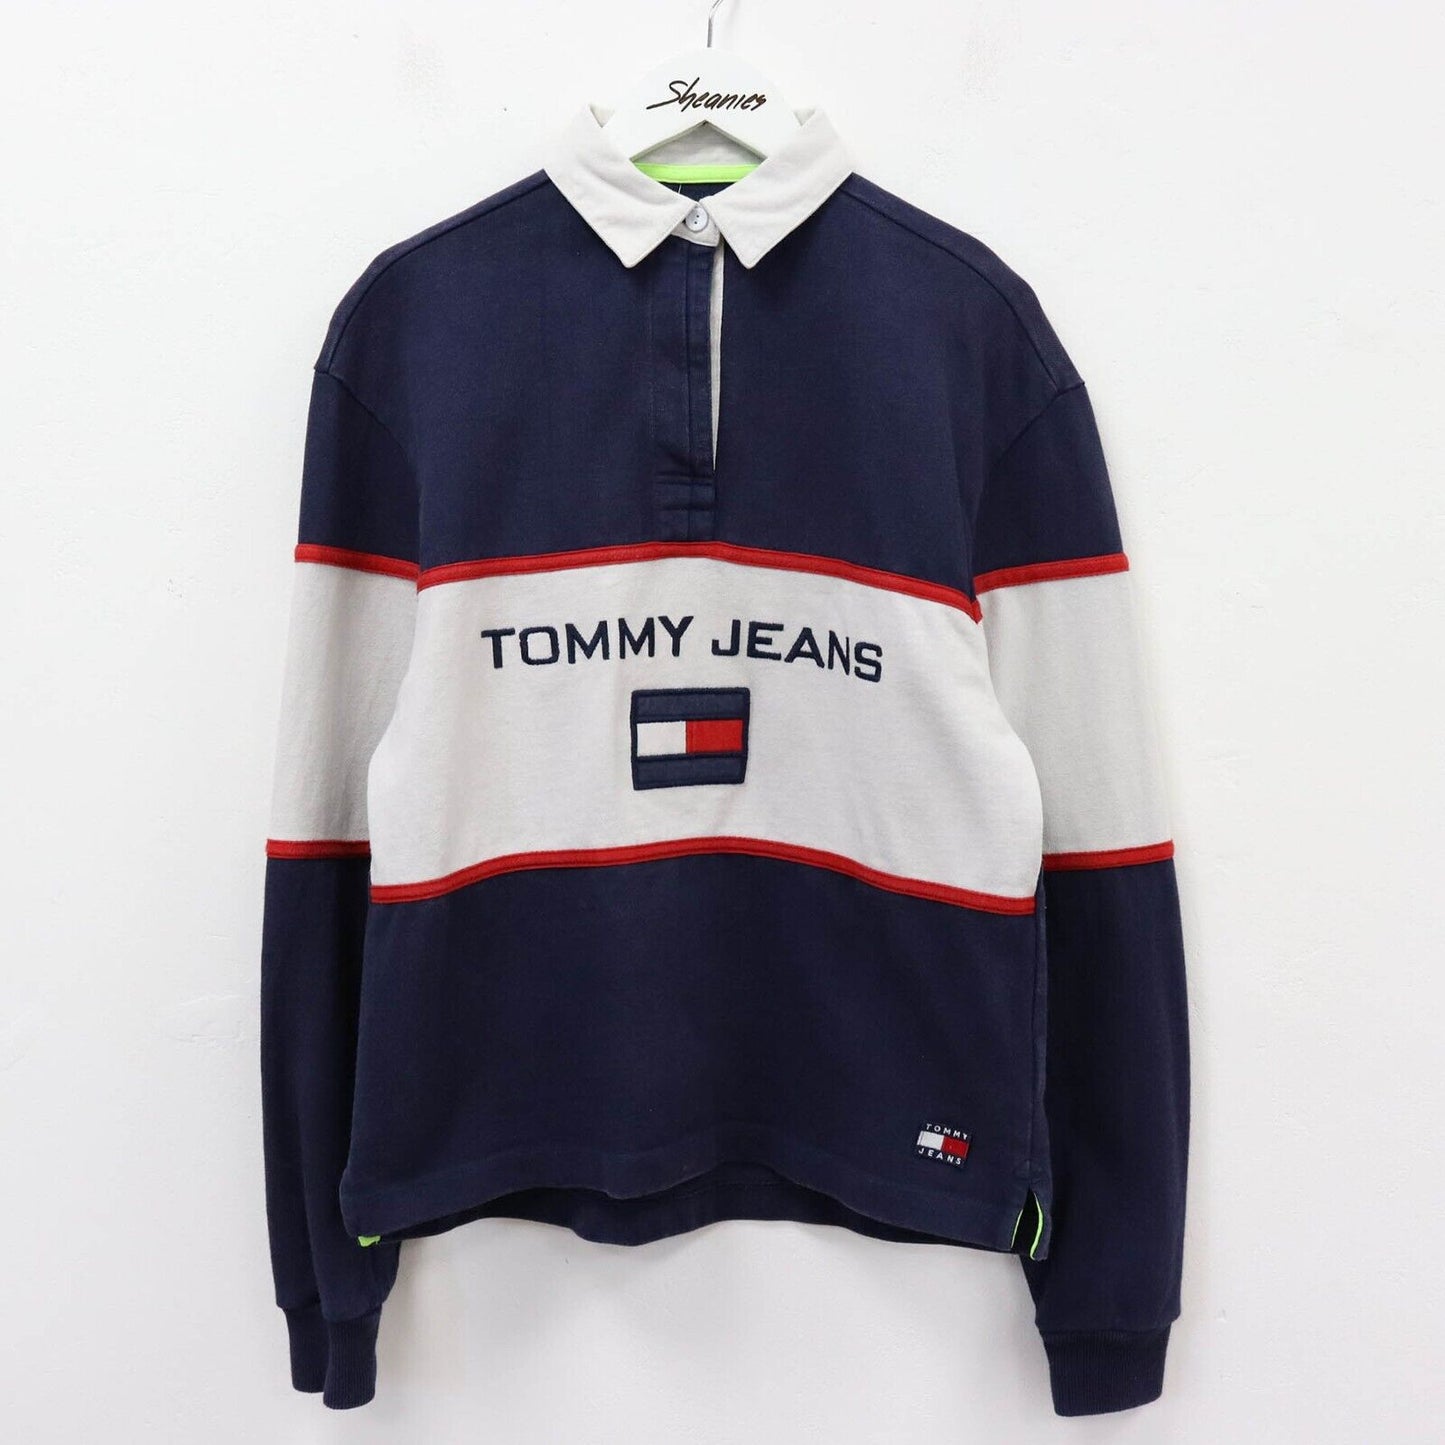 Tommy Hilfiger Rugby Shirt Size XS